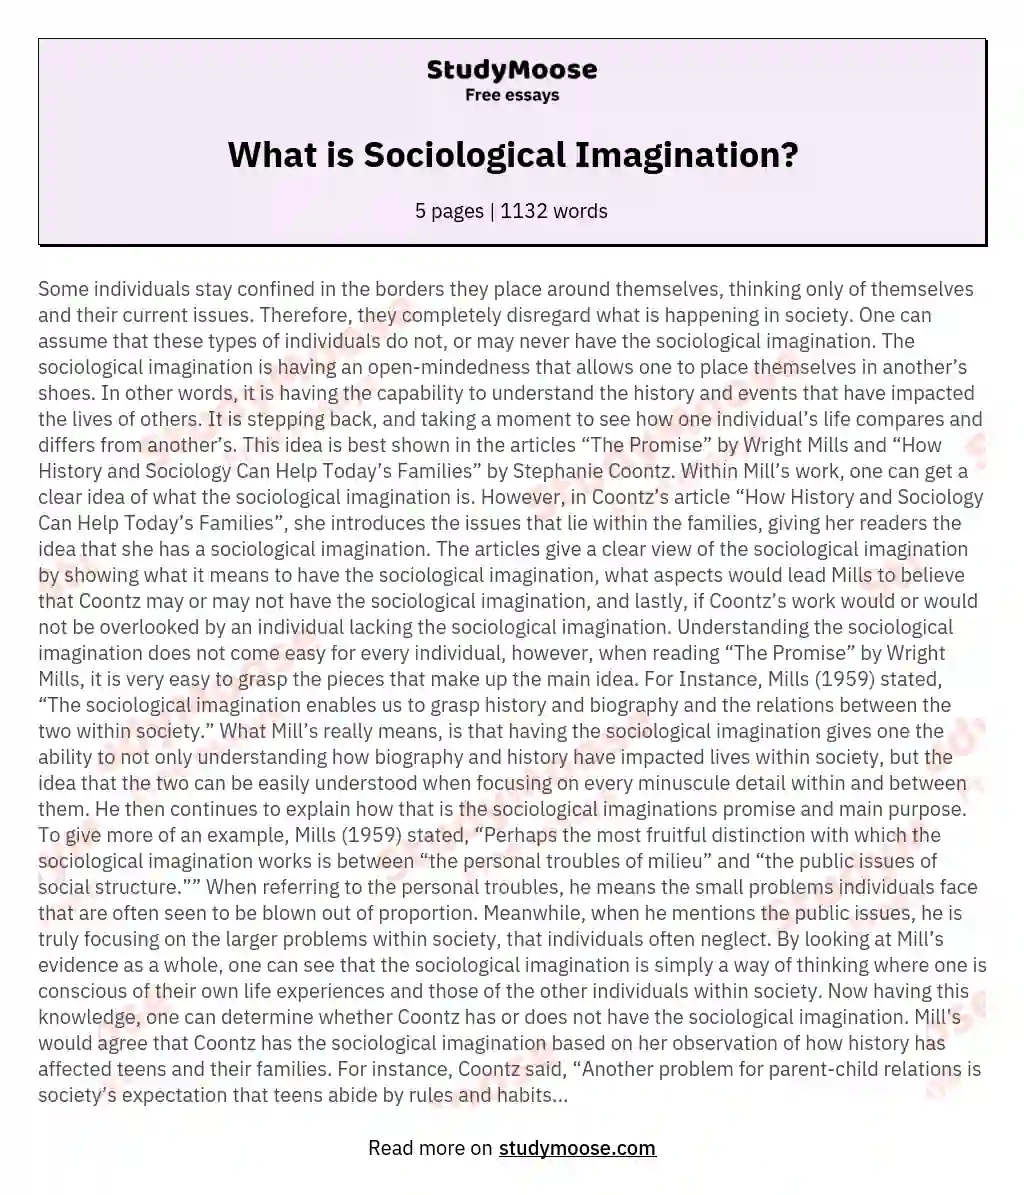 essay questions on sociological imagination